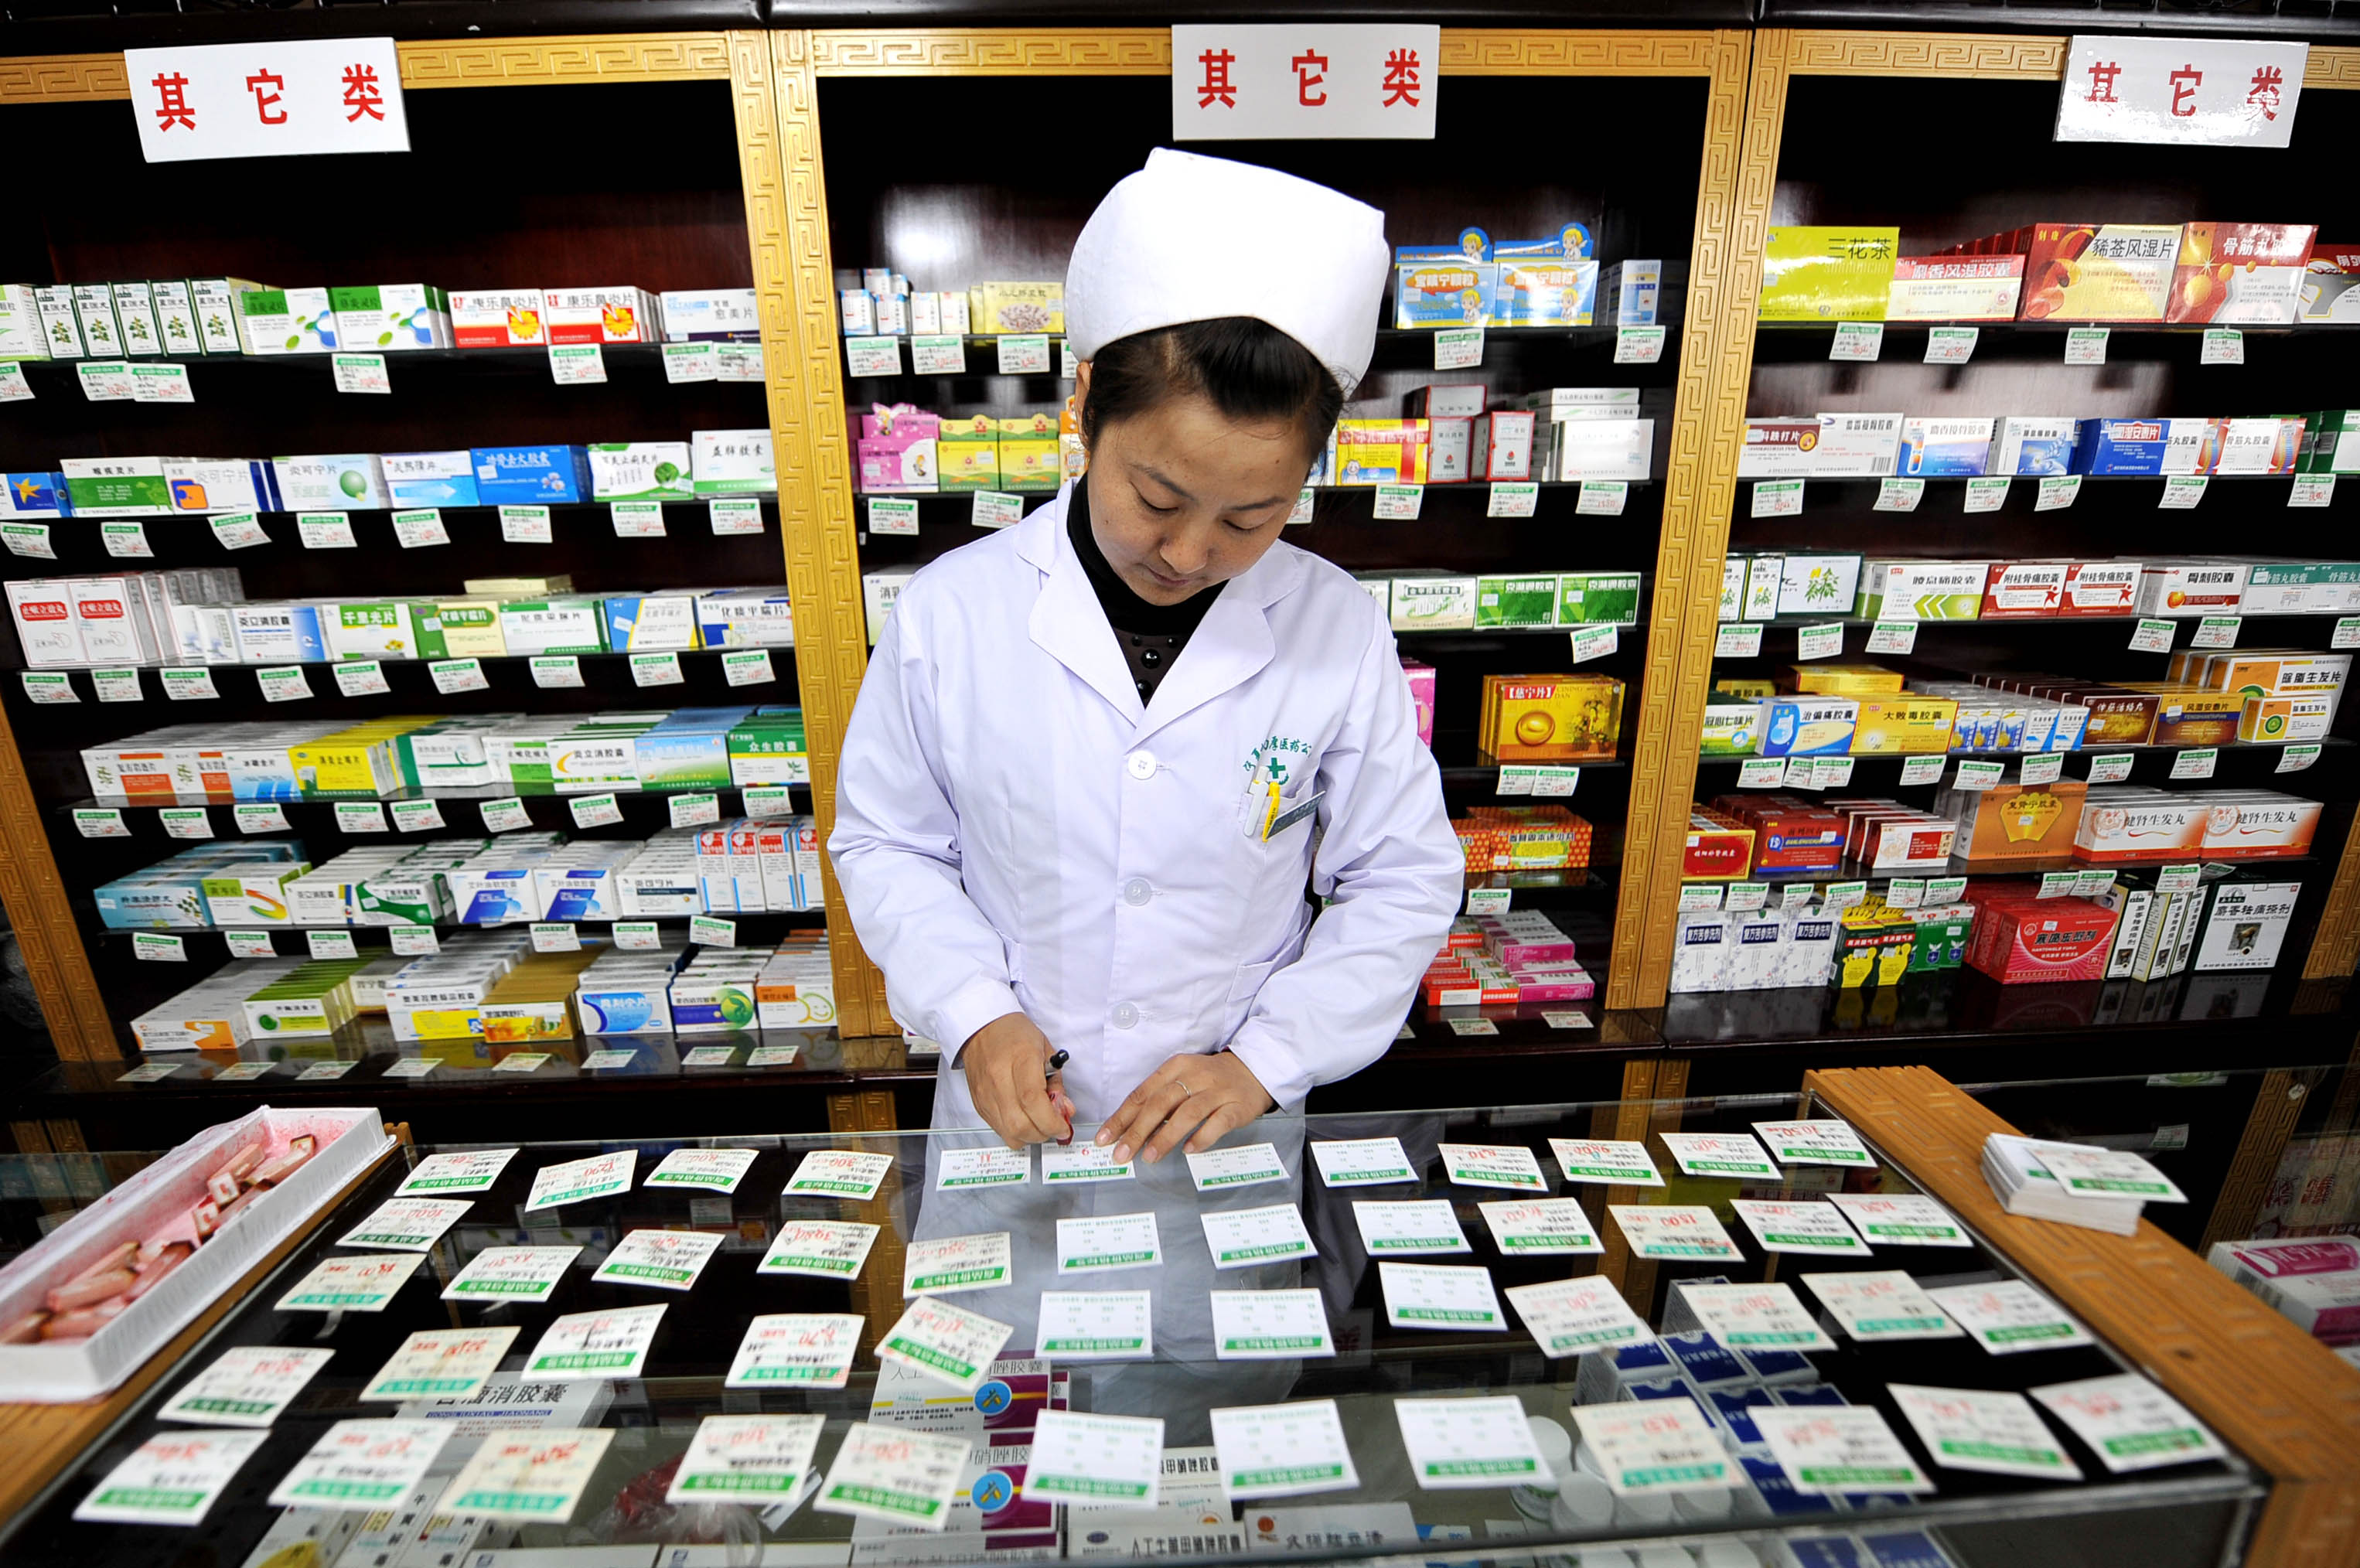 Throughout East Asia, health insurance often promotes an excessive use of medical resources, which in turn fuels an escalation in costs. Photo: Xinhua